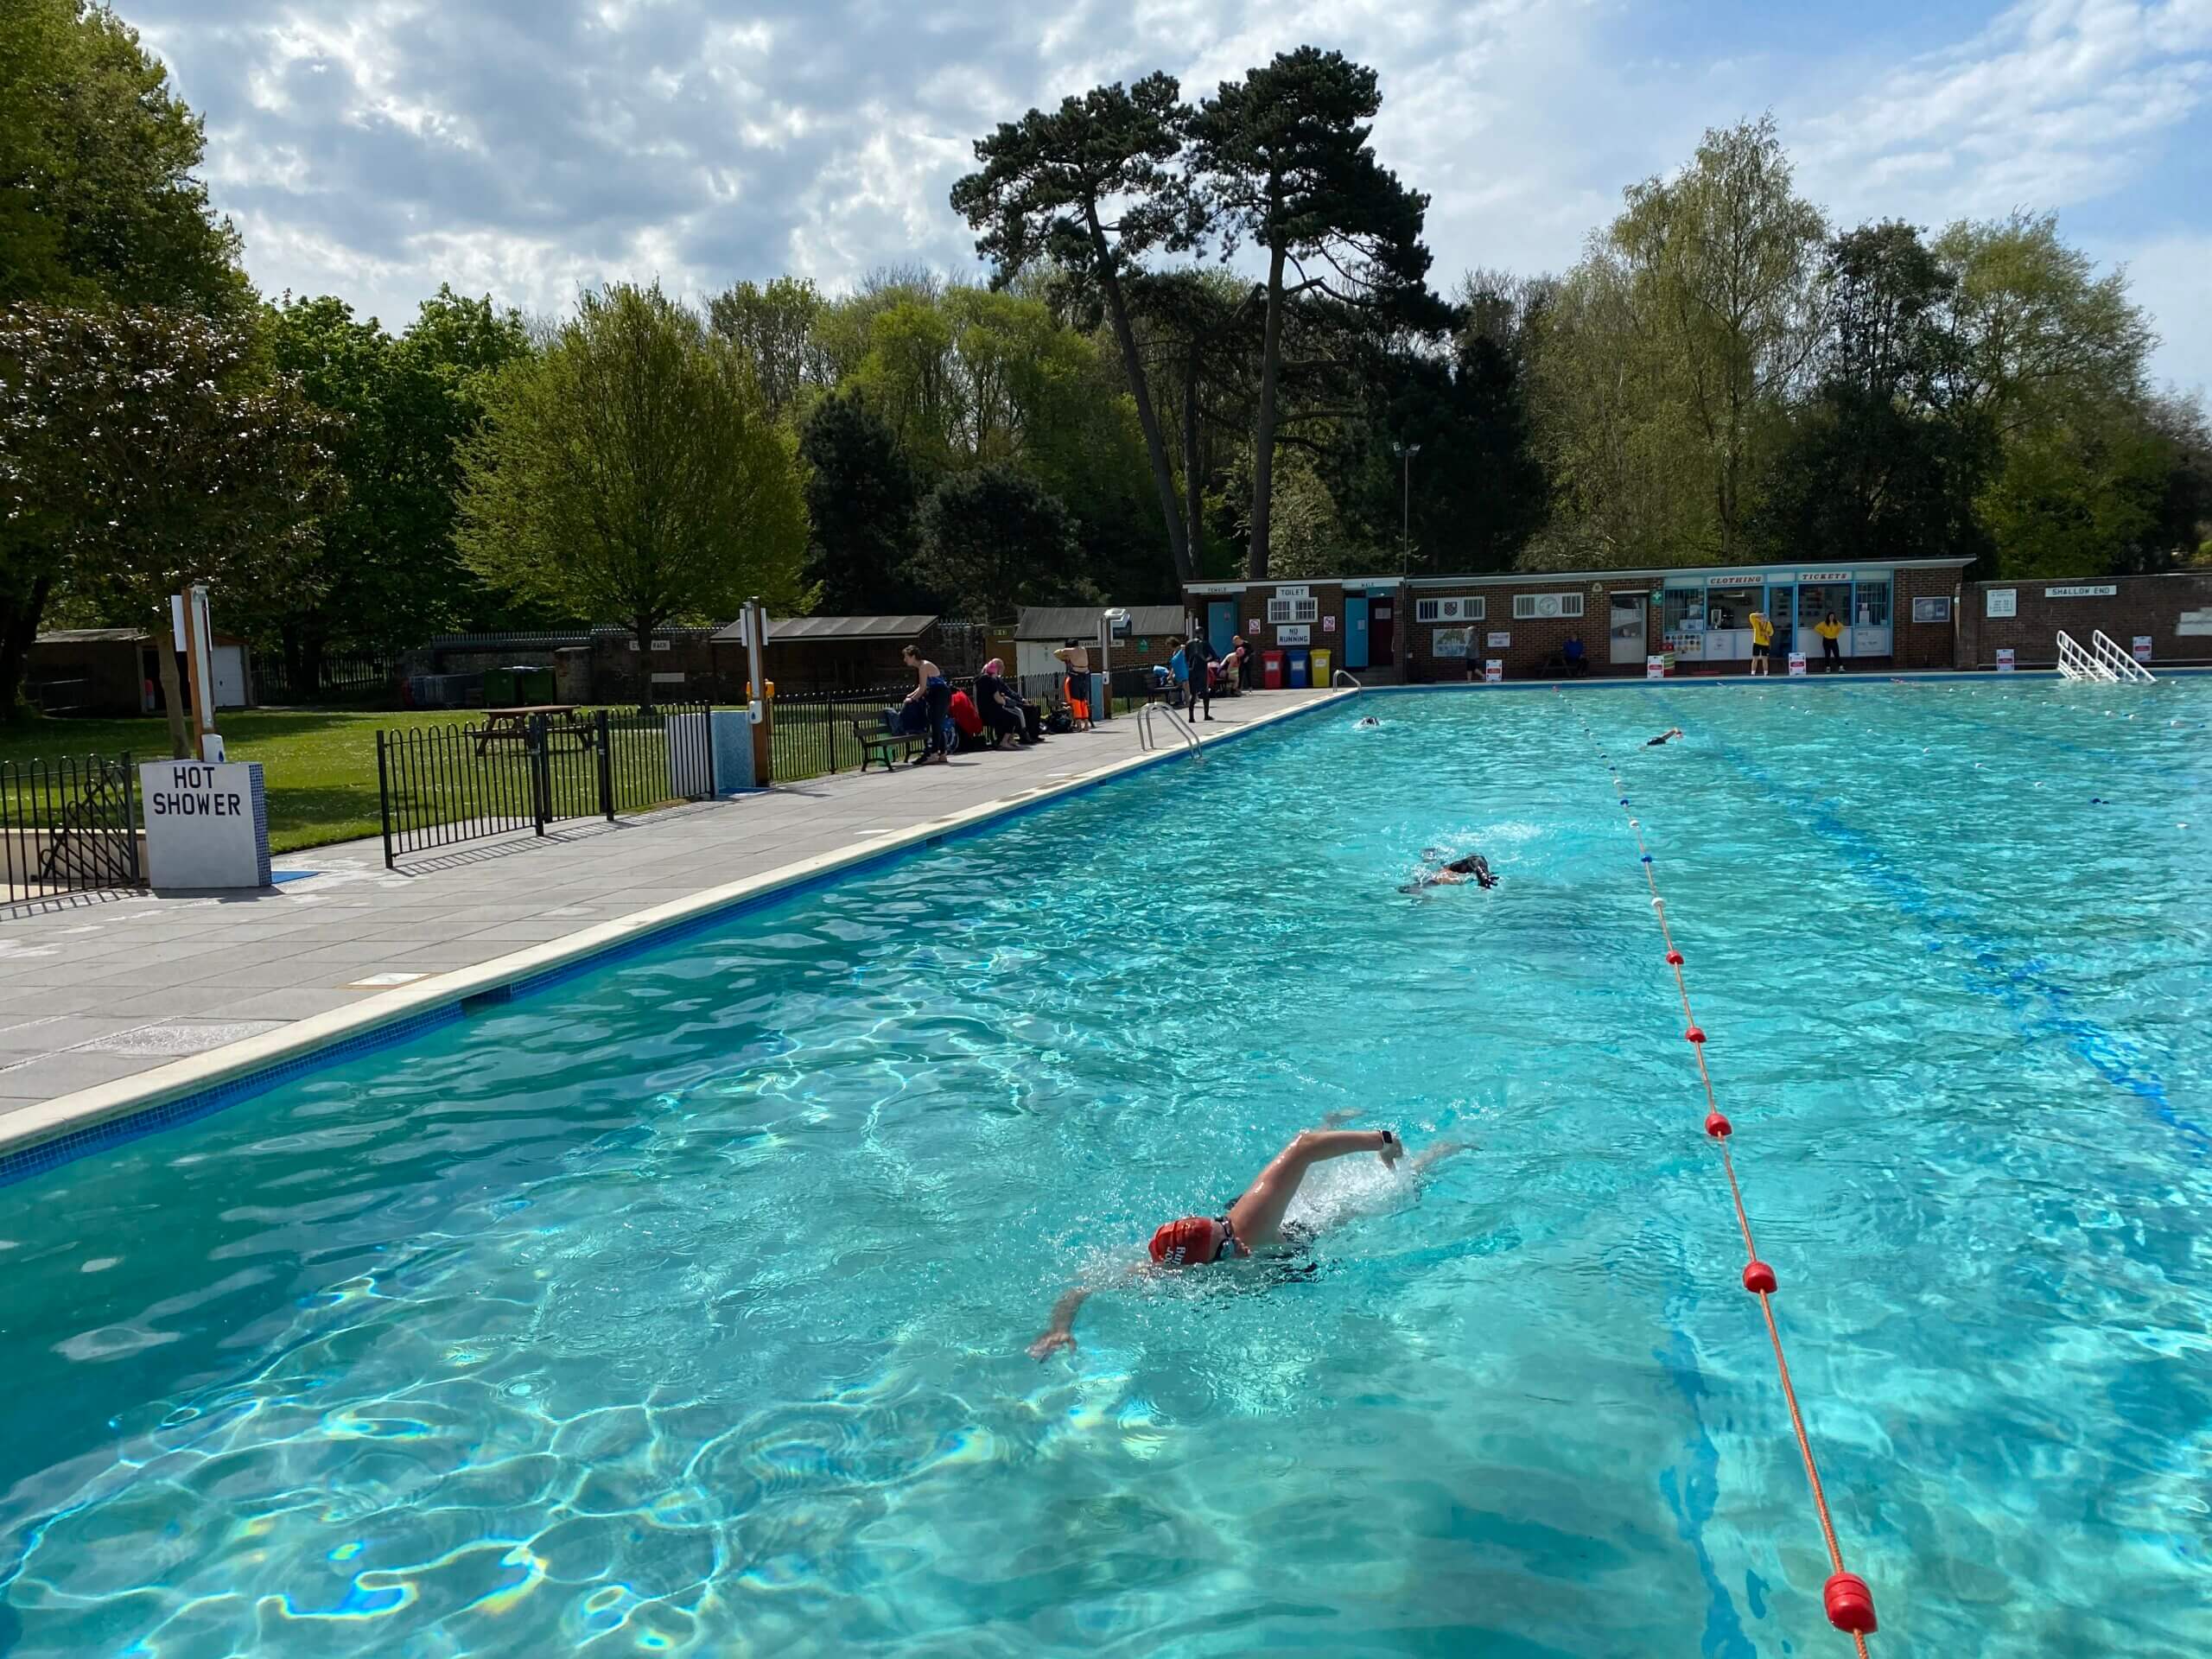 Swimmers enjoying the water at Pells Pool, Lewes, East Sussex